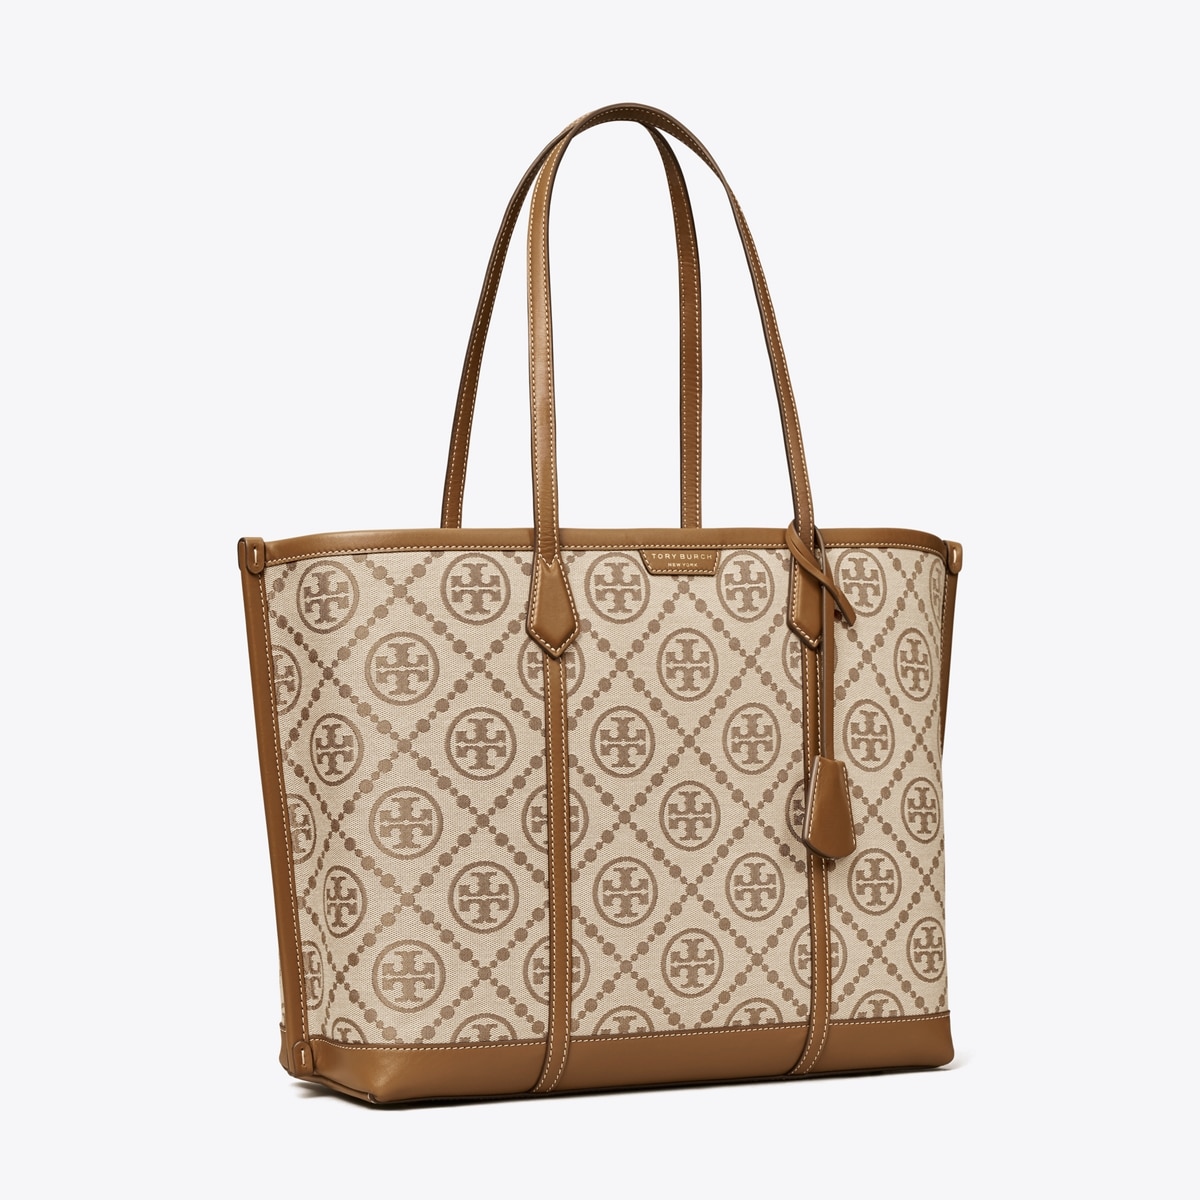 J2HL T.O.R.Y B.U.R.C.H 83312 Perry T Monogram Triple Compartment Tote Bag  in Hazel Woven Jacquard with Fine Leather Trim - Women's Bag